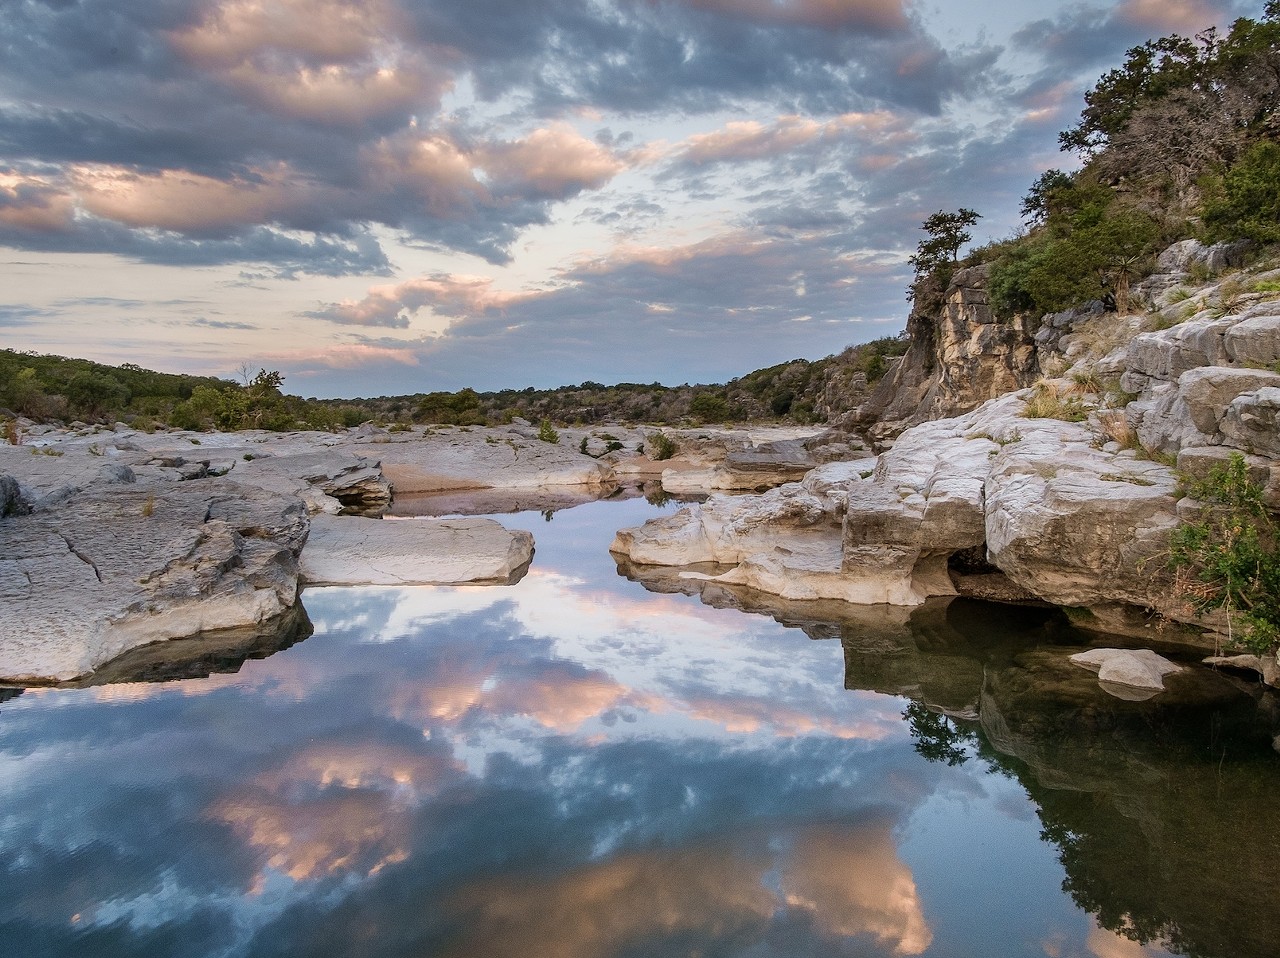 Pedernales Falls State Park
2585 Park Road 6026, Johnson City, (830) 868-7304. tpwd.texas.gov
Not too far from Johnson City are the tranquil, though sometimes turbulent, waters at Pedernales Falls. This park should be visited by folks who thrive in natural scenery as it offers camping, hiking, biking, bird-watching and horseback riding, as well as a butterfly garden. Certain areas are available to swim in, but there’s also chances for tubing, canoeing and kayaking down the river.